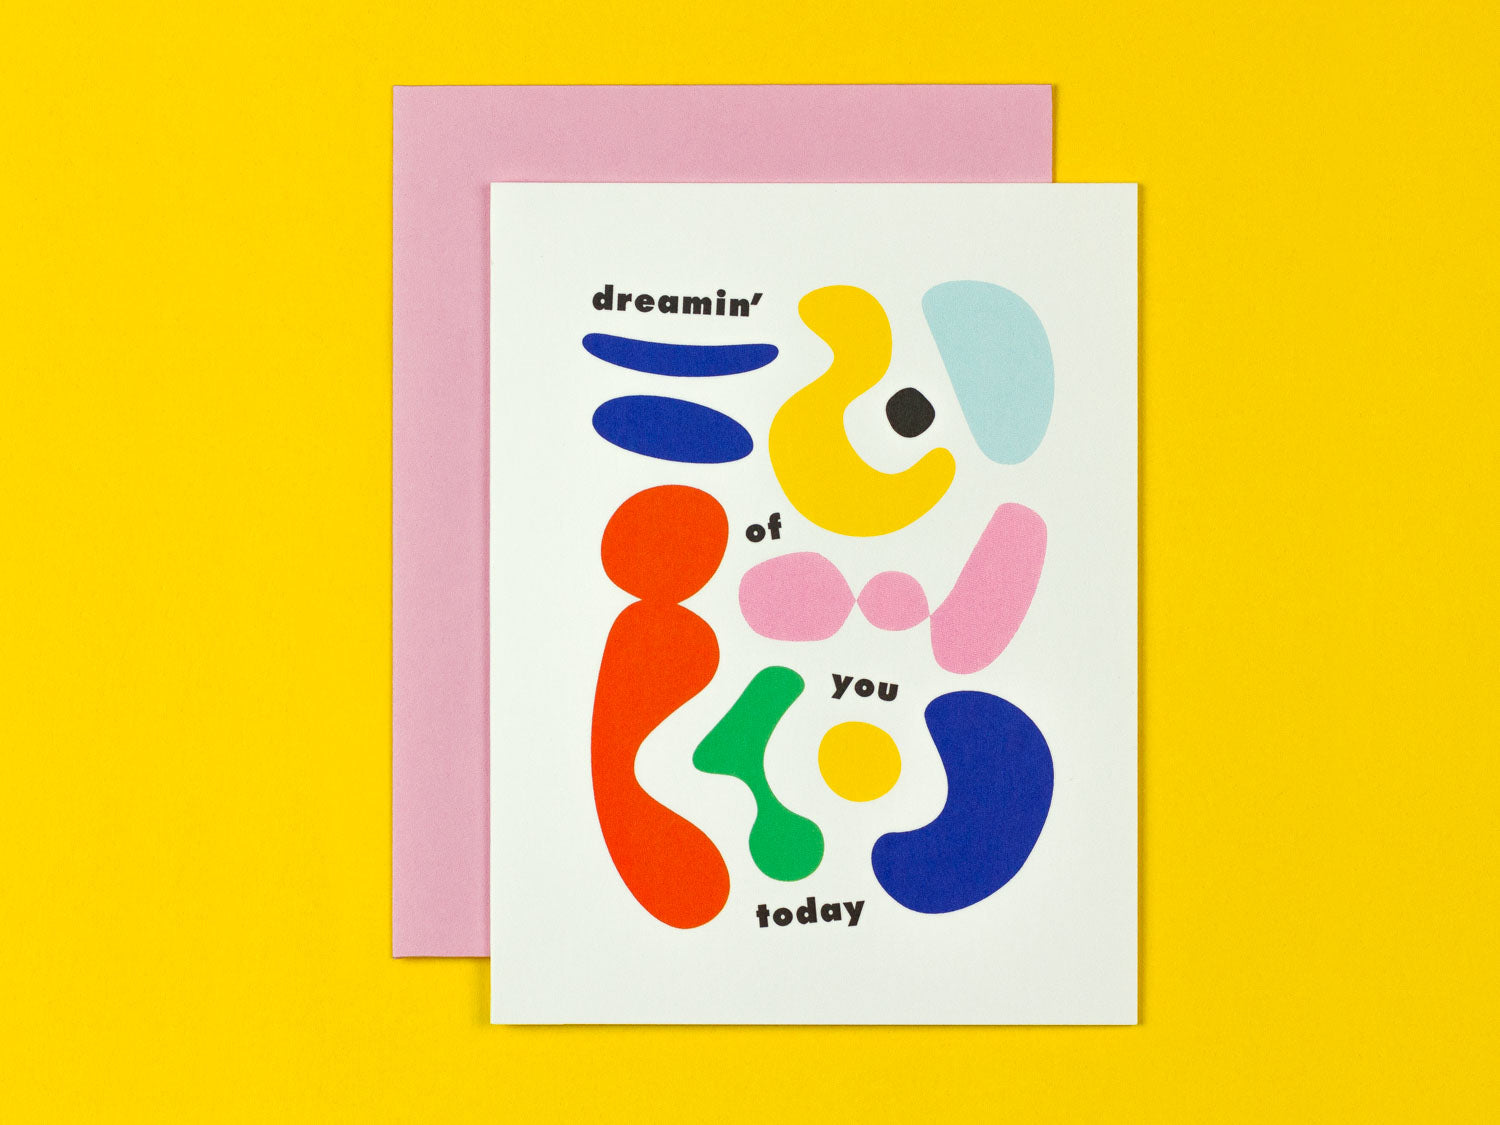 Dreamin' of You Today love card with colorful abstract shapes by @mydarlin_bk